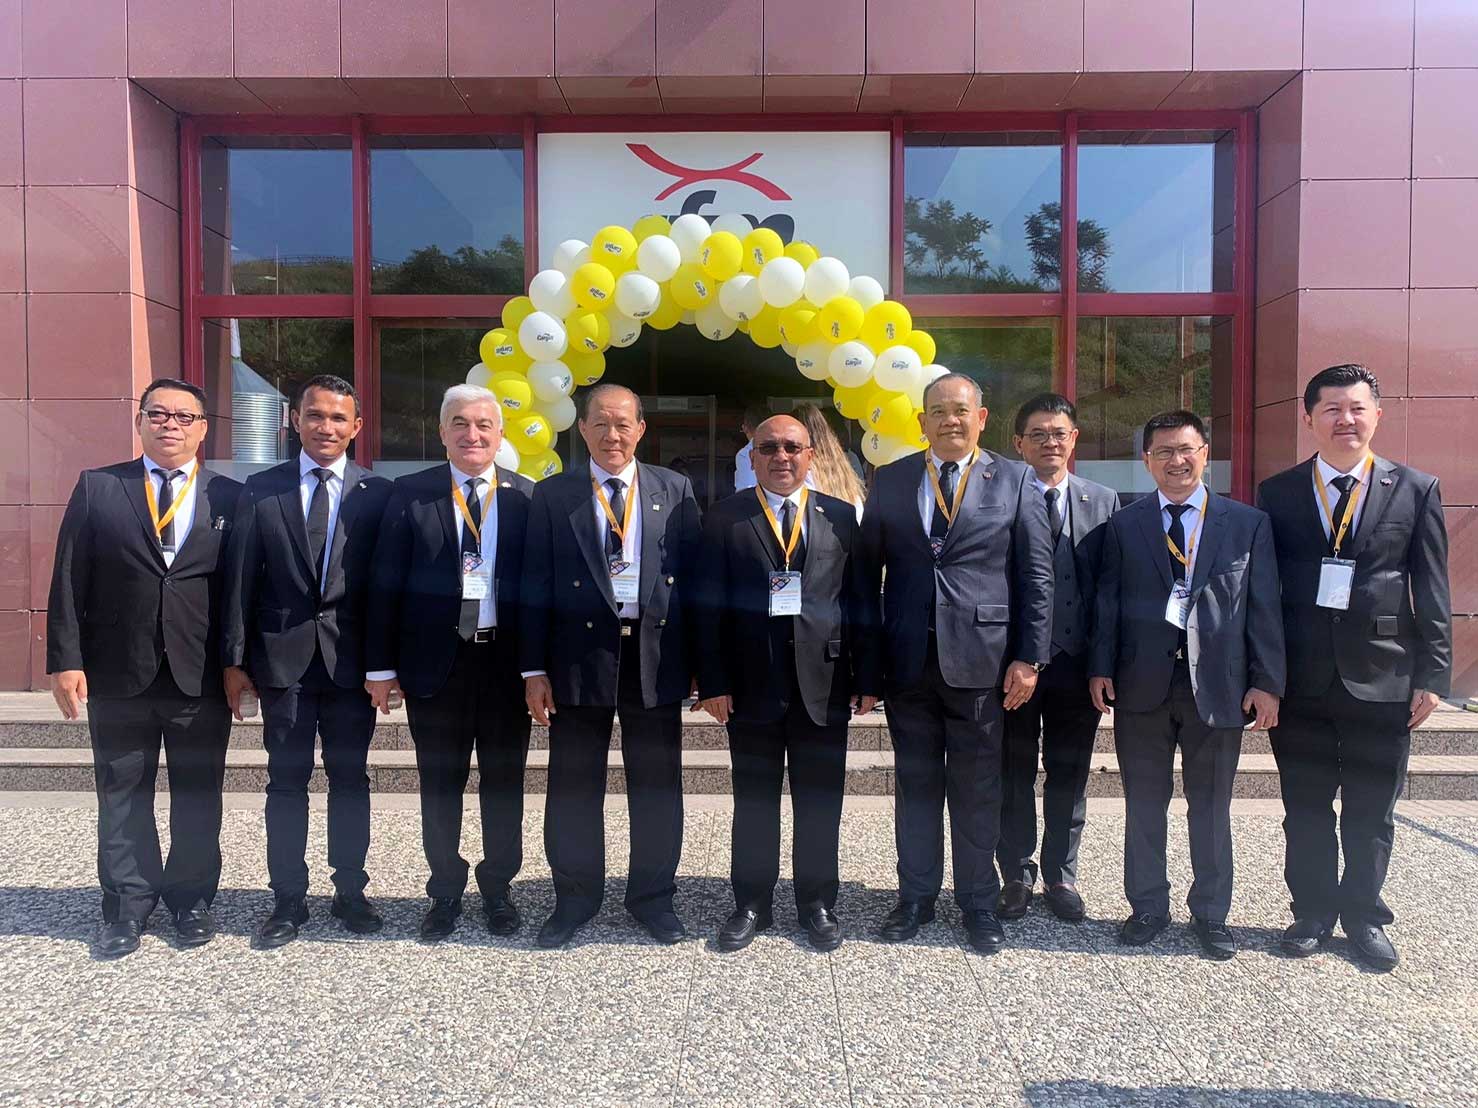 CP Turkey showcases high quality products in the VIV TURKEY 2019